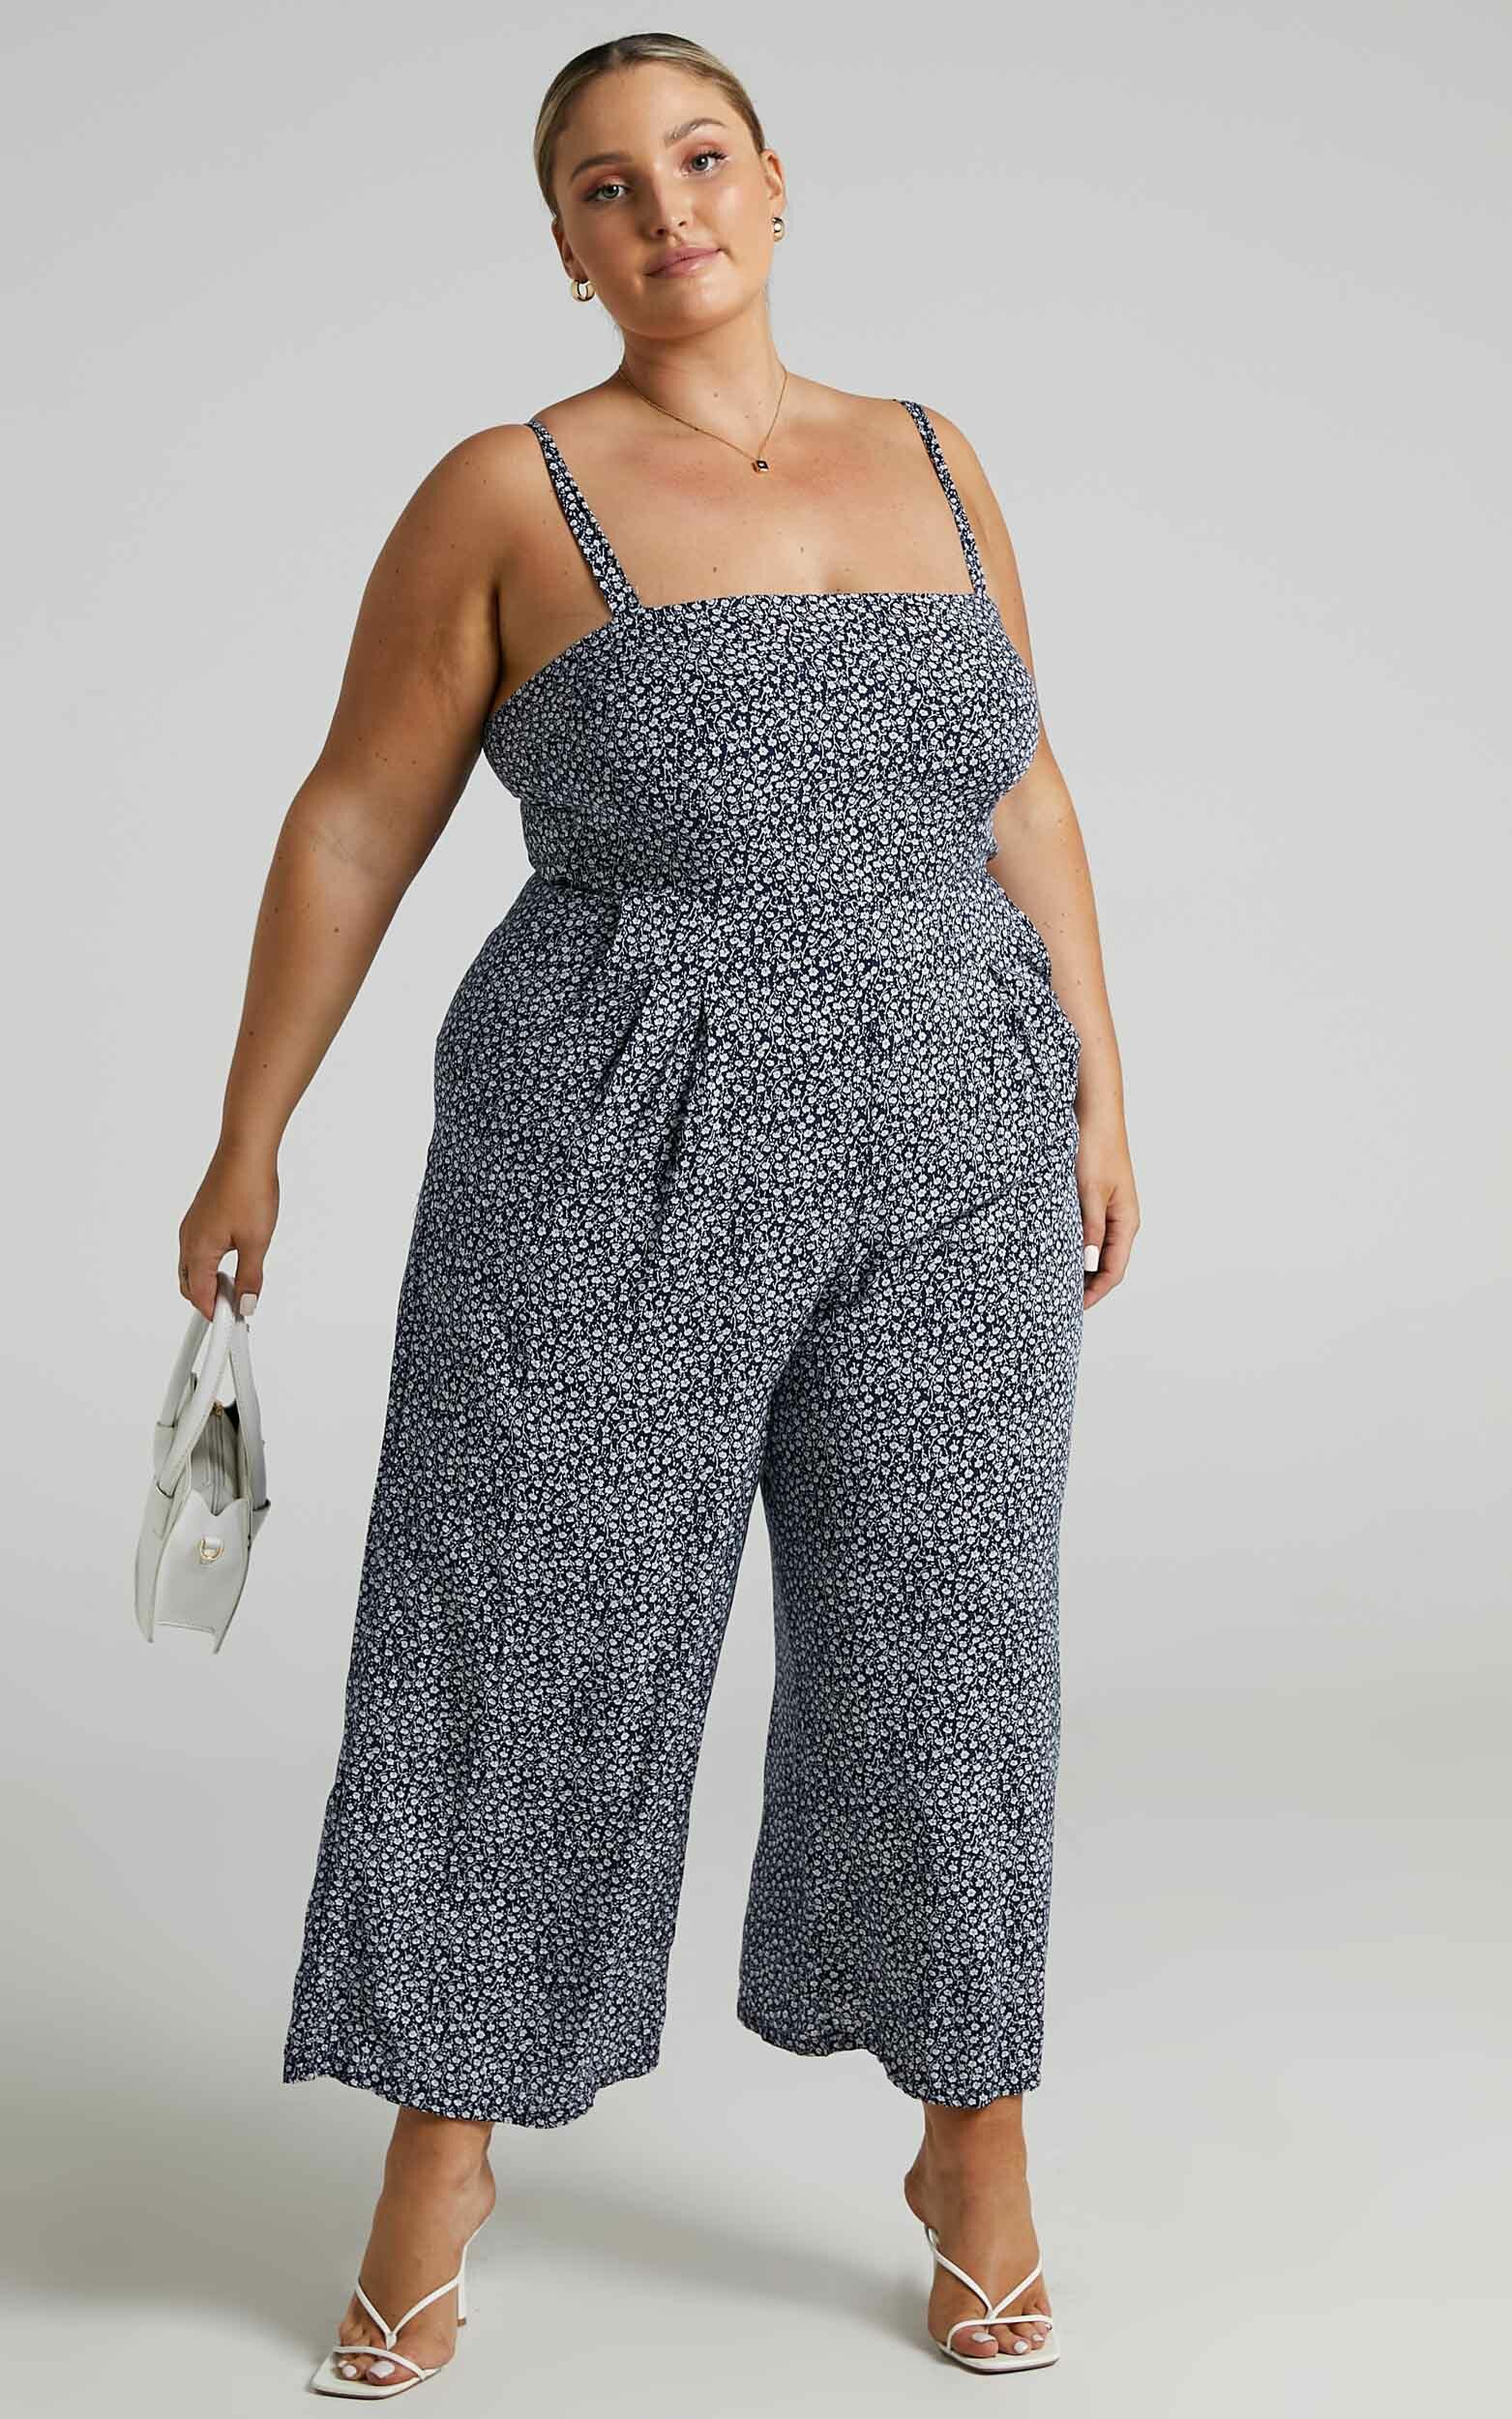 Life On The Road Jumpsuit in Navy Floral - 06, NVY3, hi-res image number null